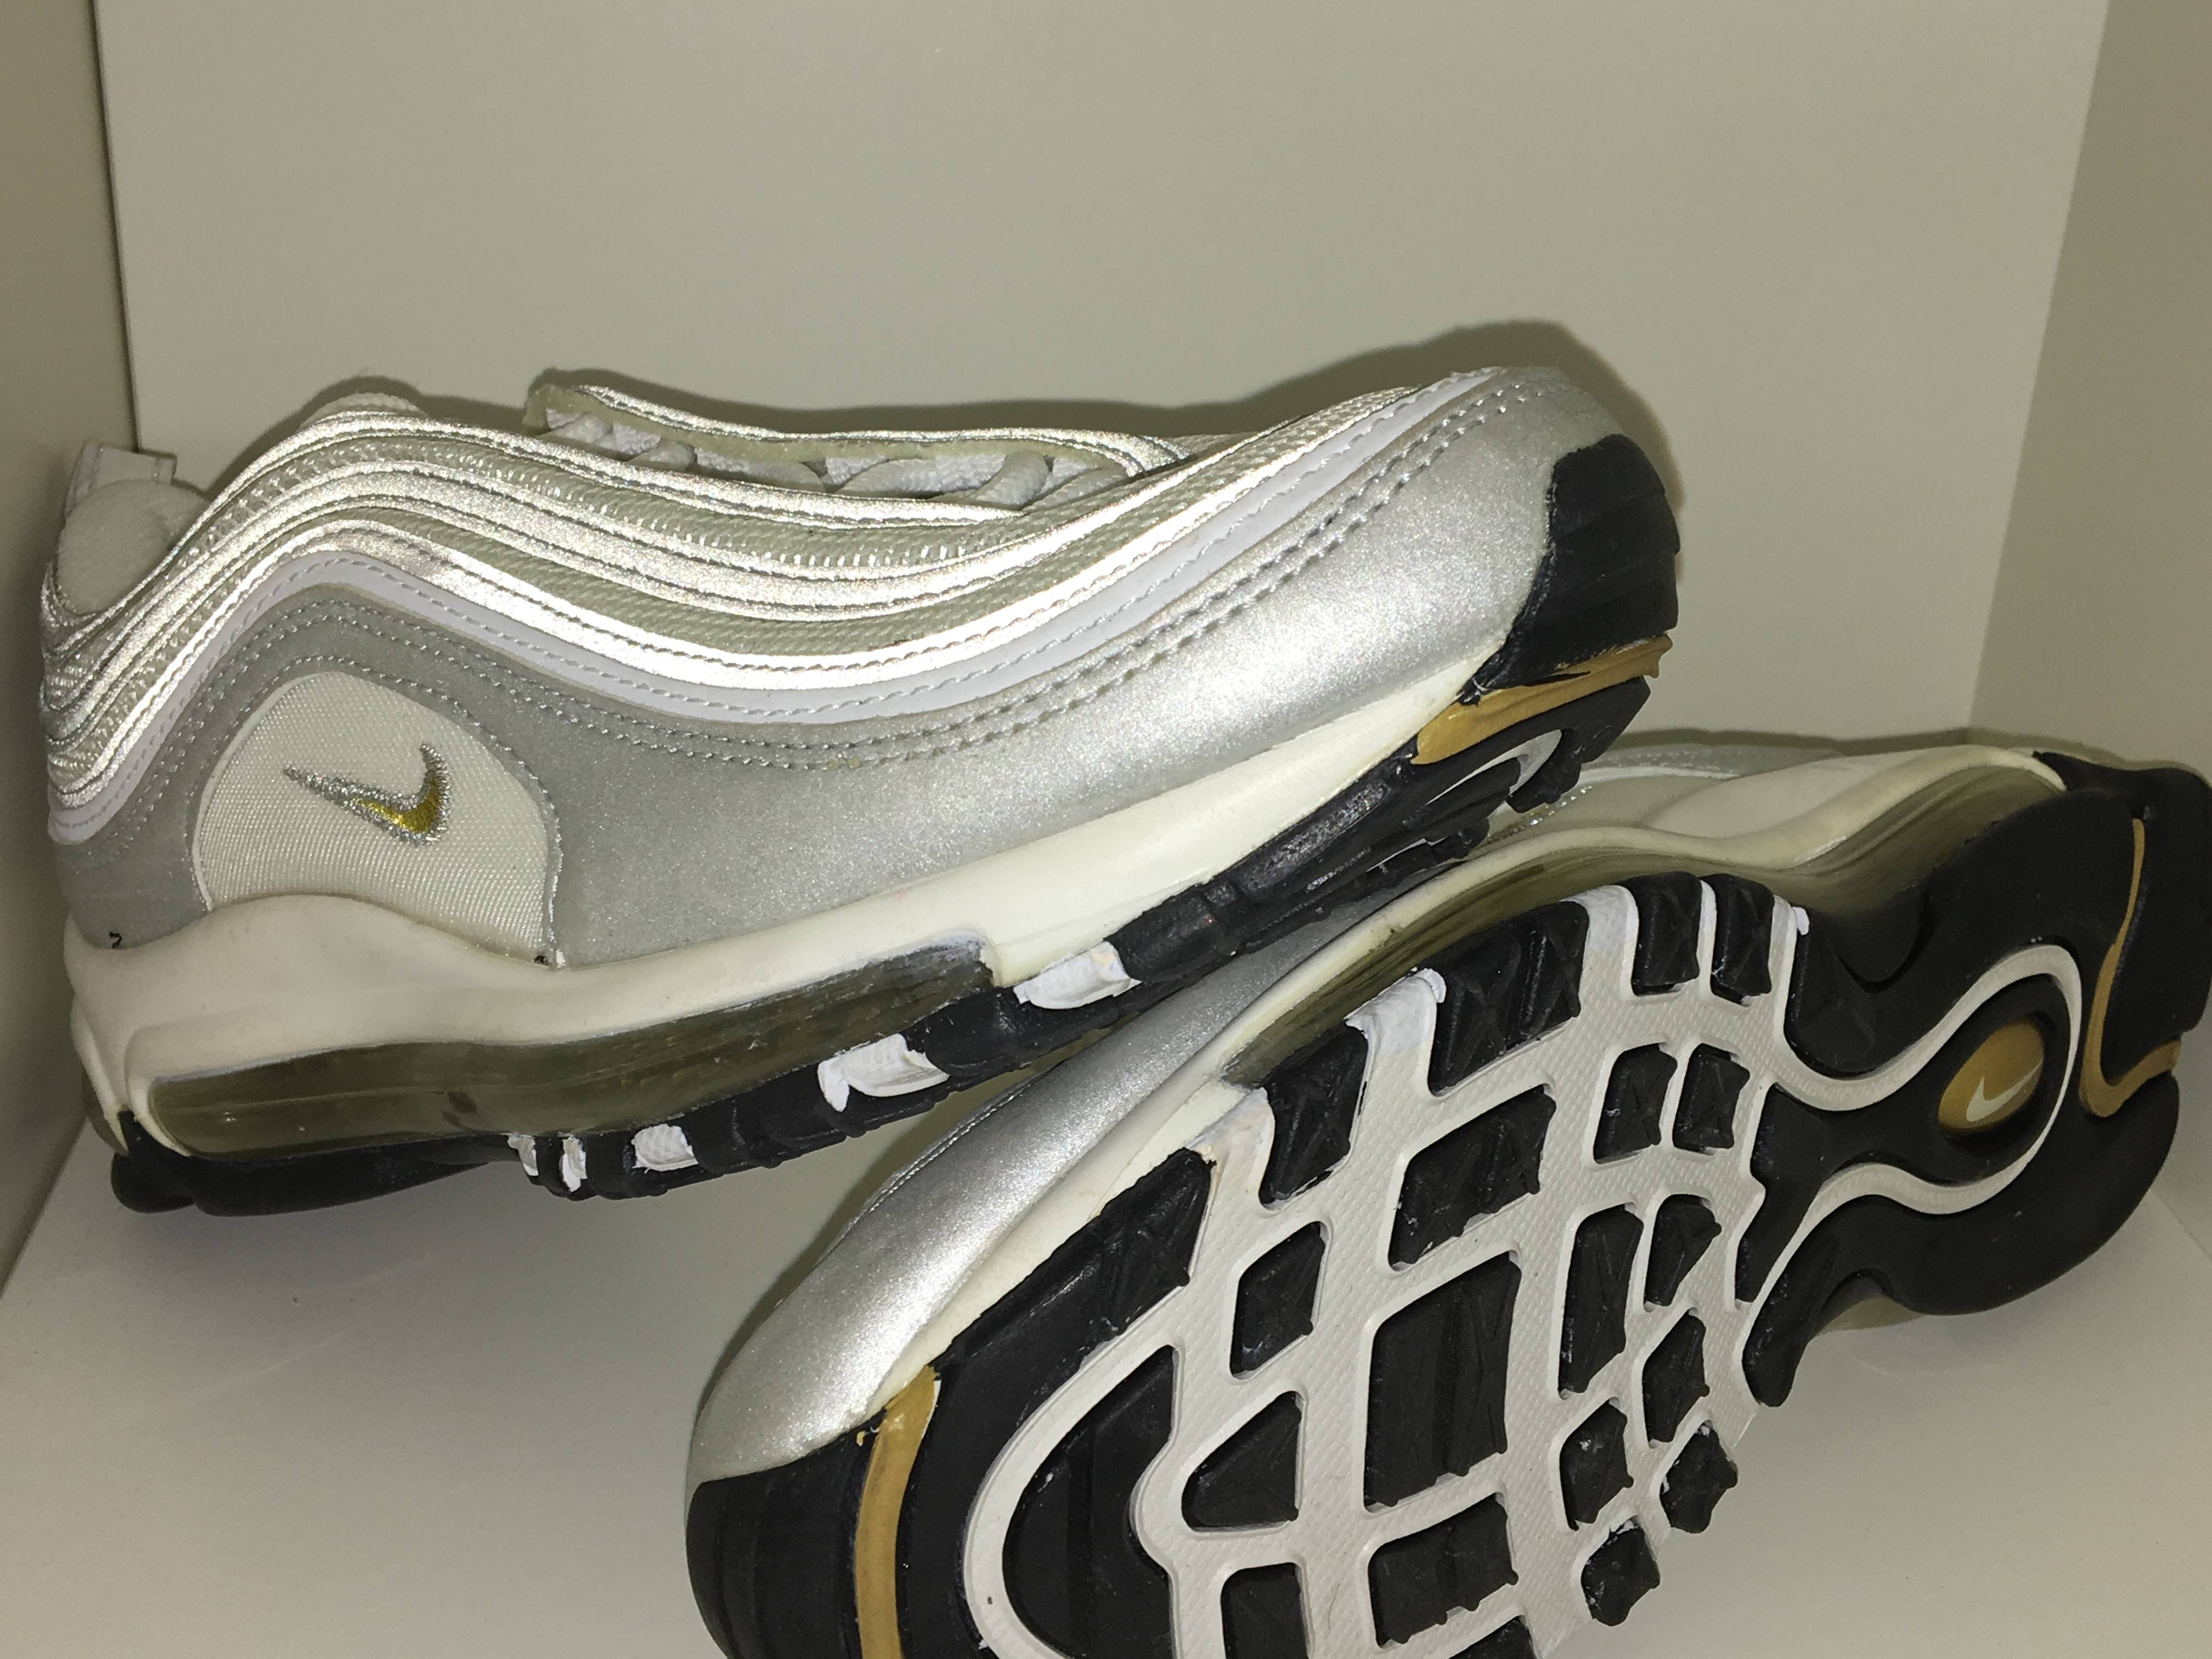 Thriftstore find Air max 97 (2007) great condition but are these Legit? |  NikeTalk